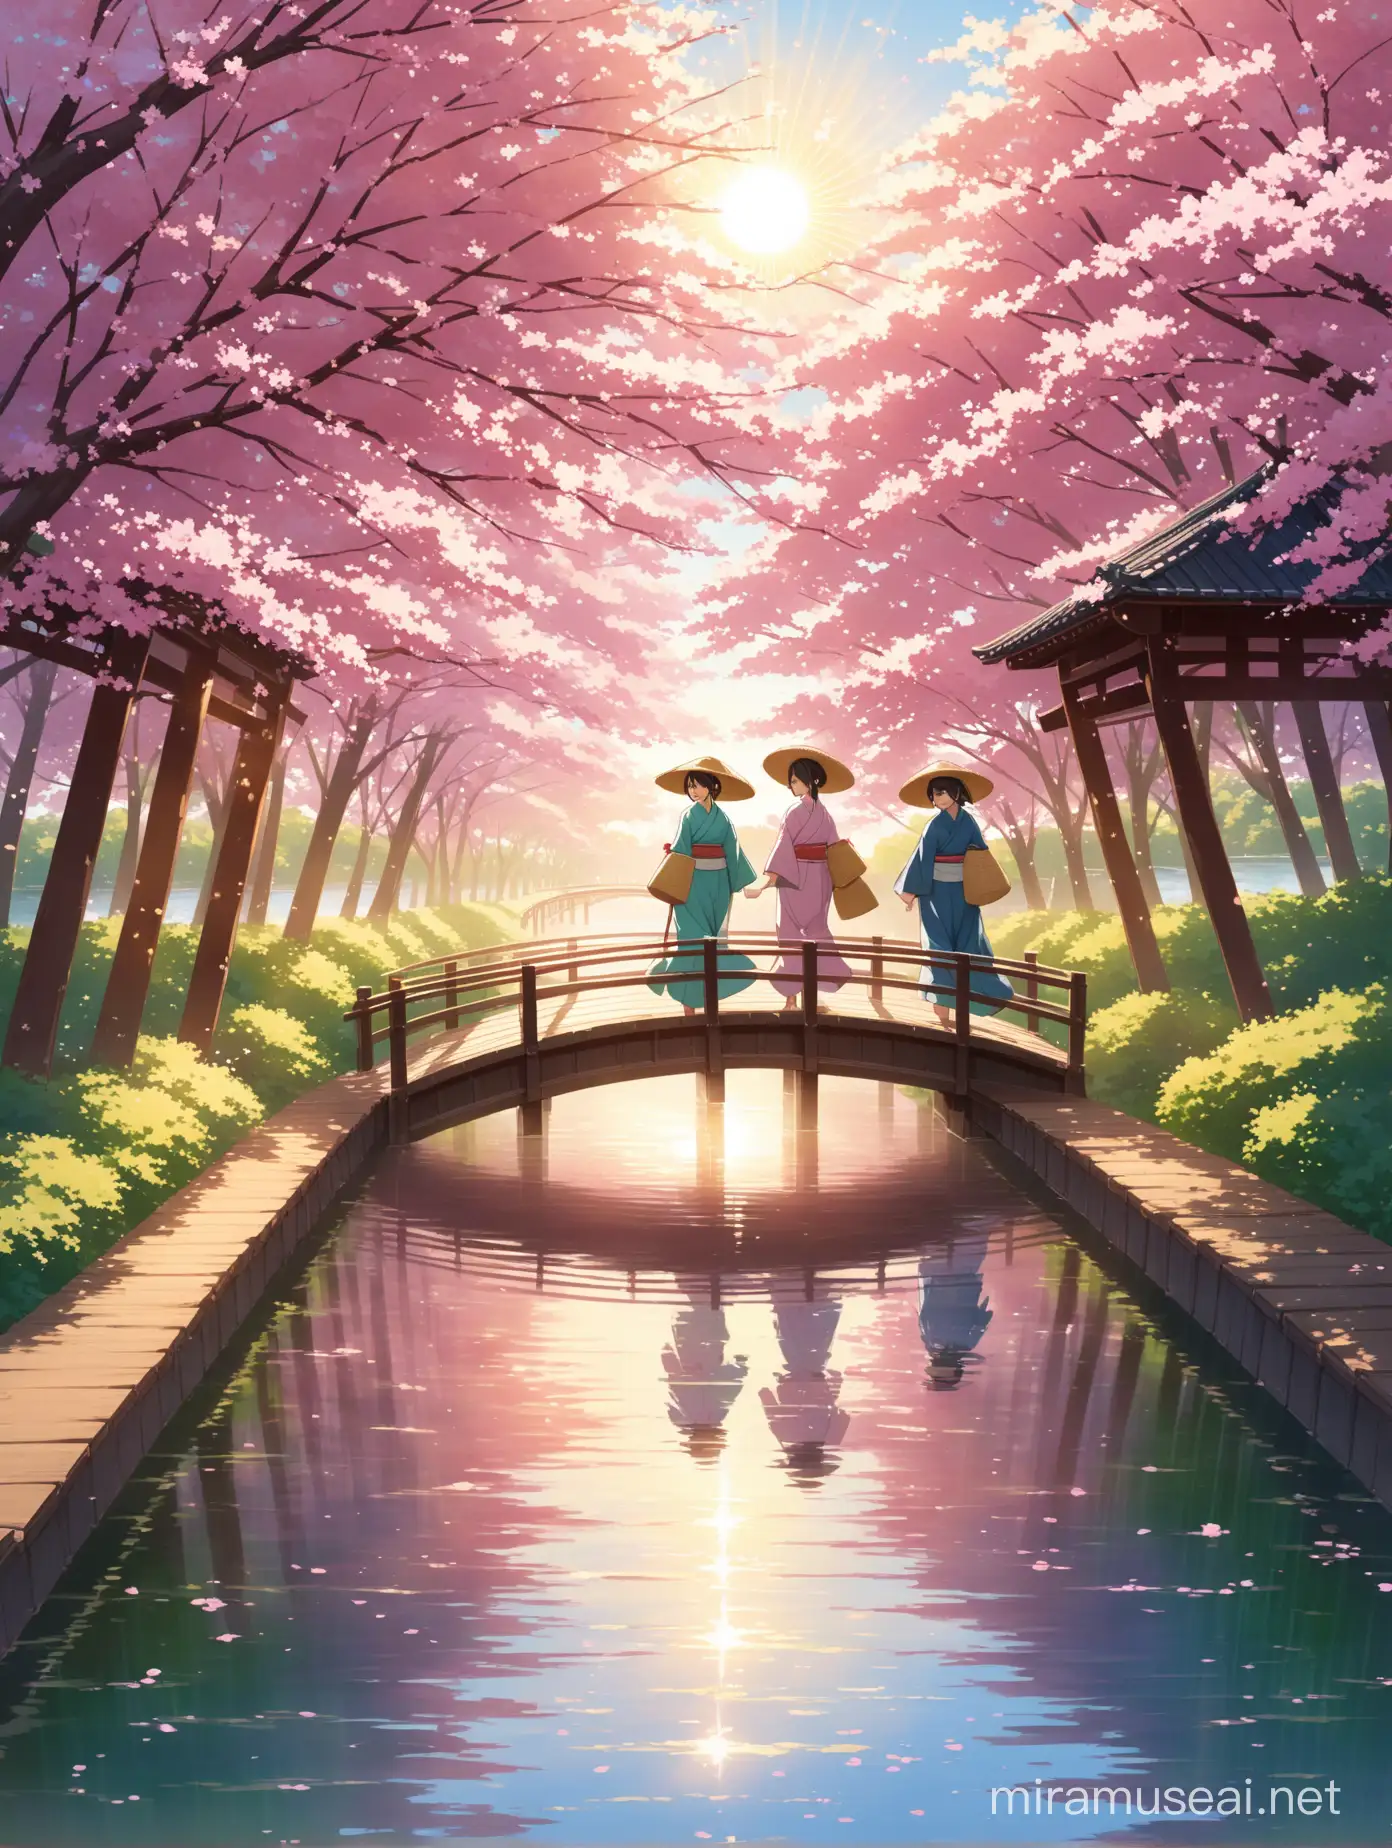 Two Women from the Muromachi period wearing a straw hat and wooden sabots, walk across a bridge in a park with sakura trees around them, water passing below and the sun's rays reflecting on it